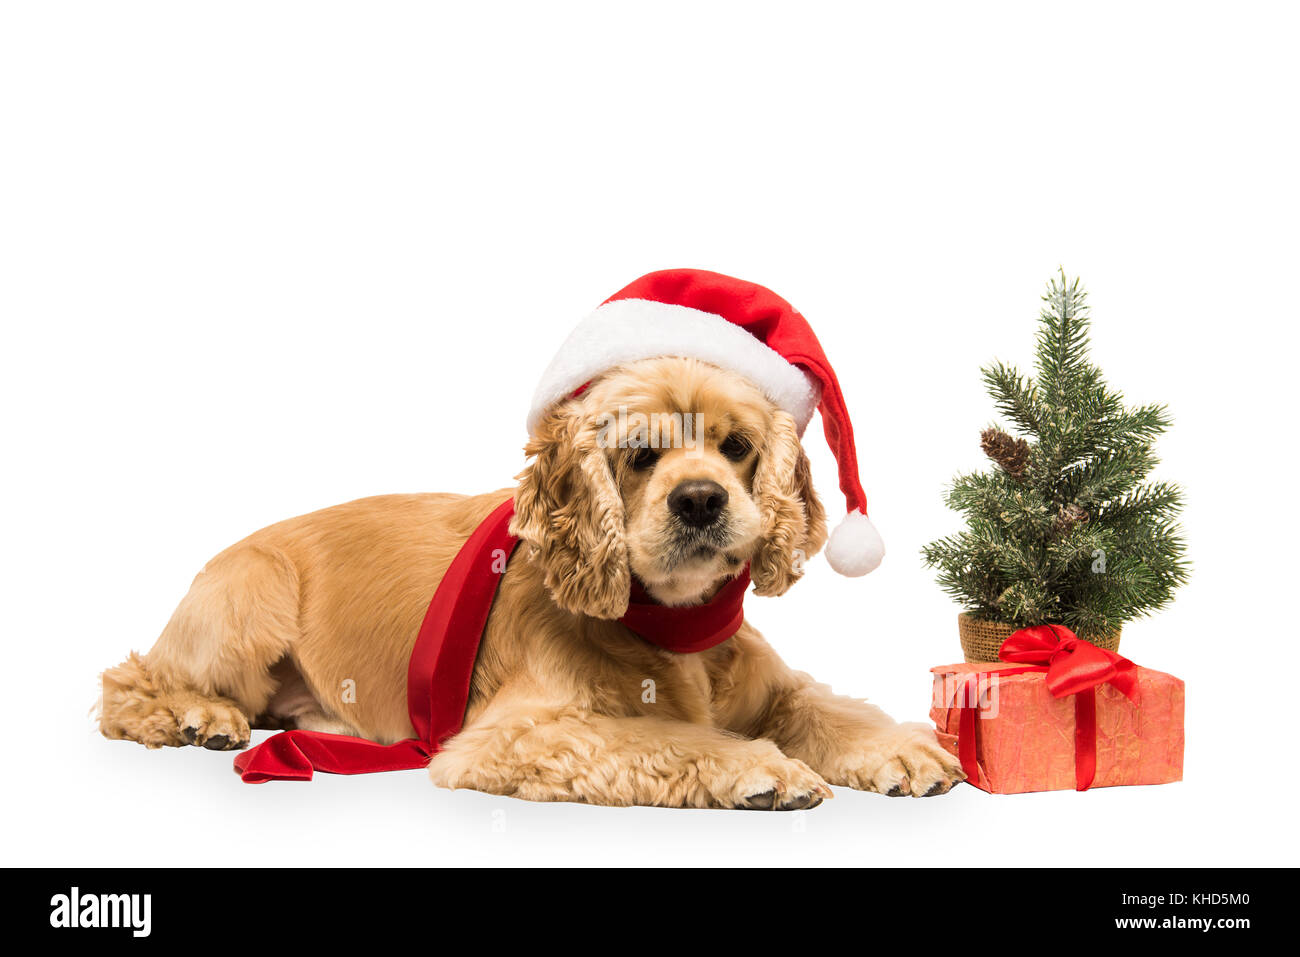 American cocker spaniel with Santa's cap and a red scarf on white background. Red christmas tree and festive gift box. Stock Photo